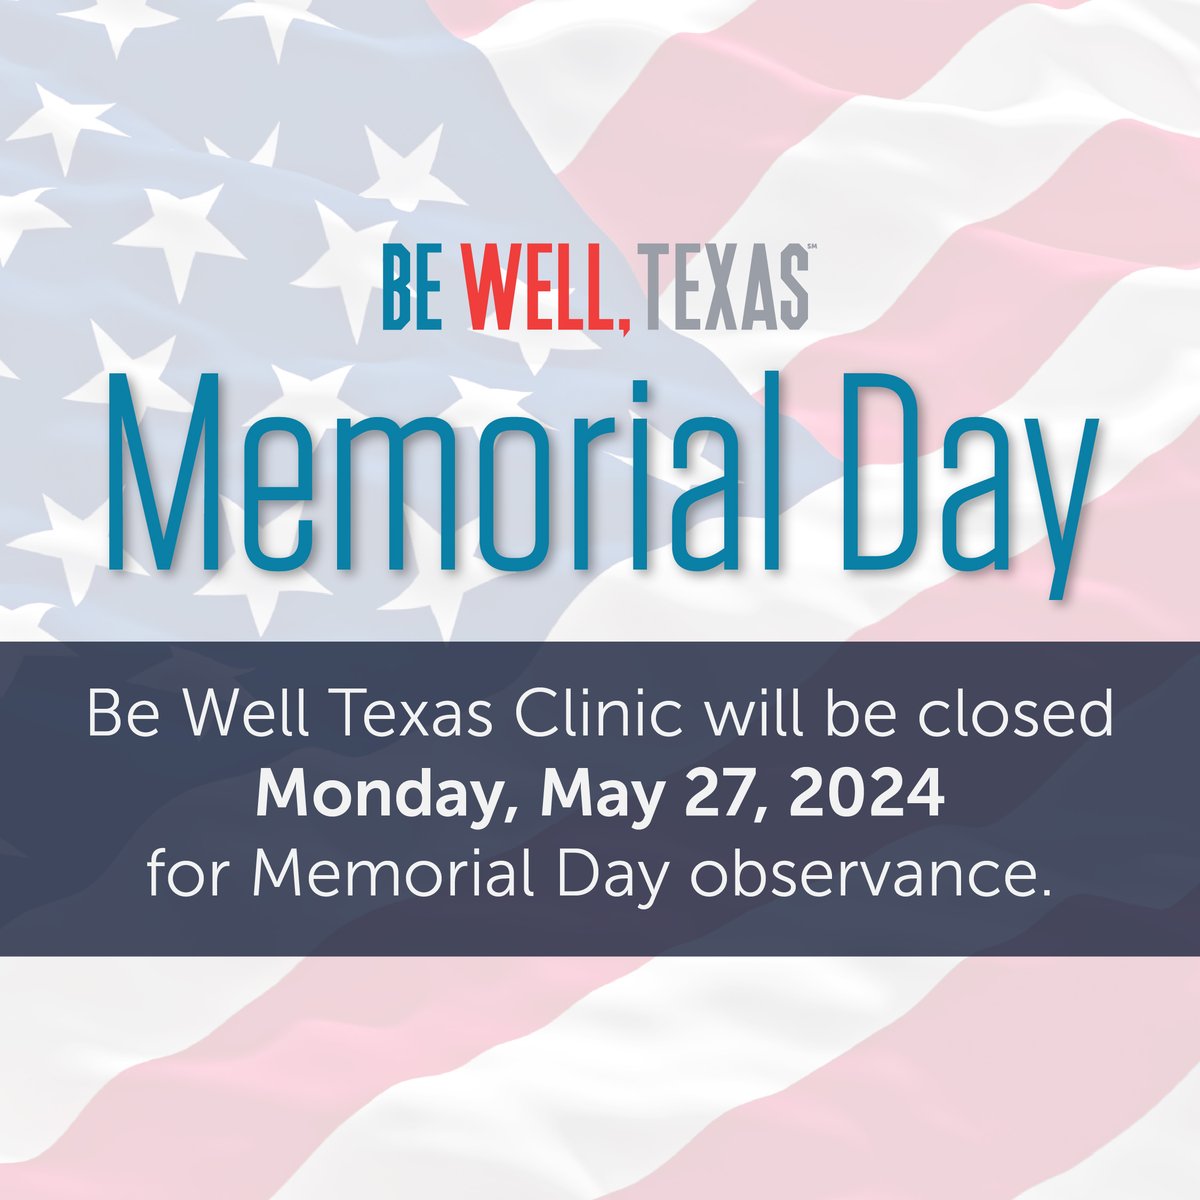 Today, we honor those who made the ultimate sacrifice for our country. In honor of Memorial Day, #BeWellTexas Clinic will be closed on May 27, 2024 as we pay tribute to their sacrifice.❤️🤍💙 If you are in need of assistance, live support is available by calling 888-85-BeWell.